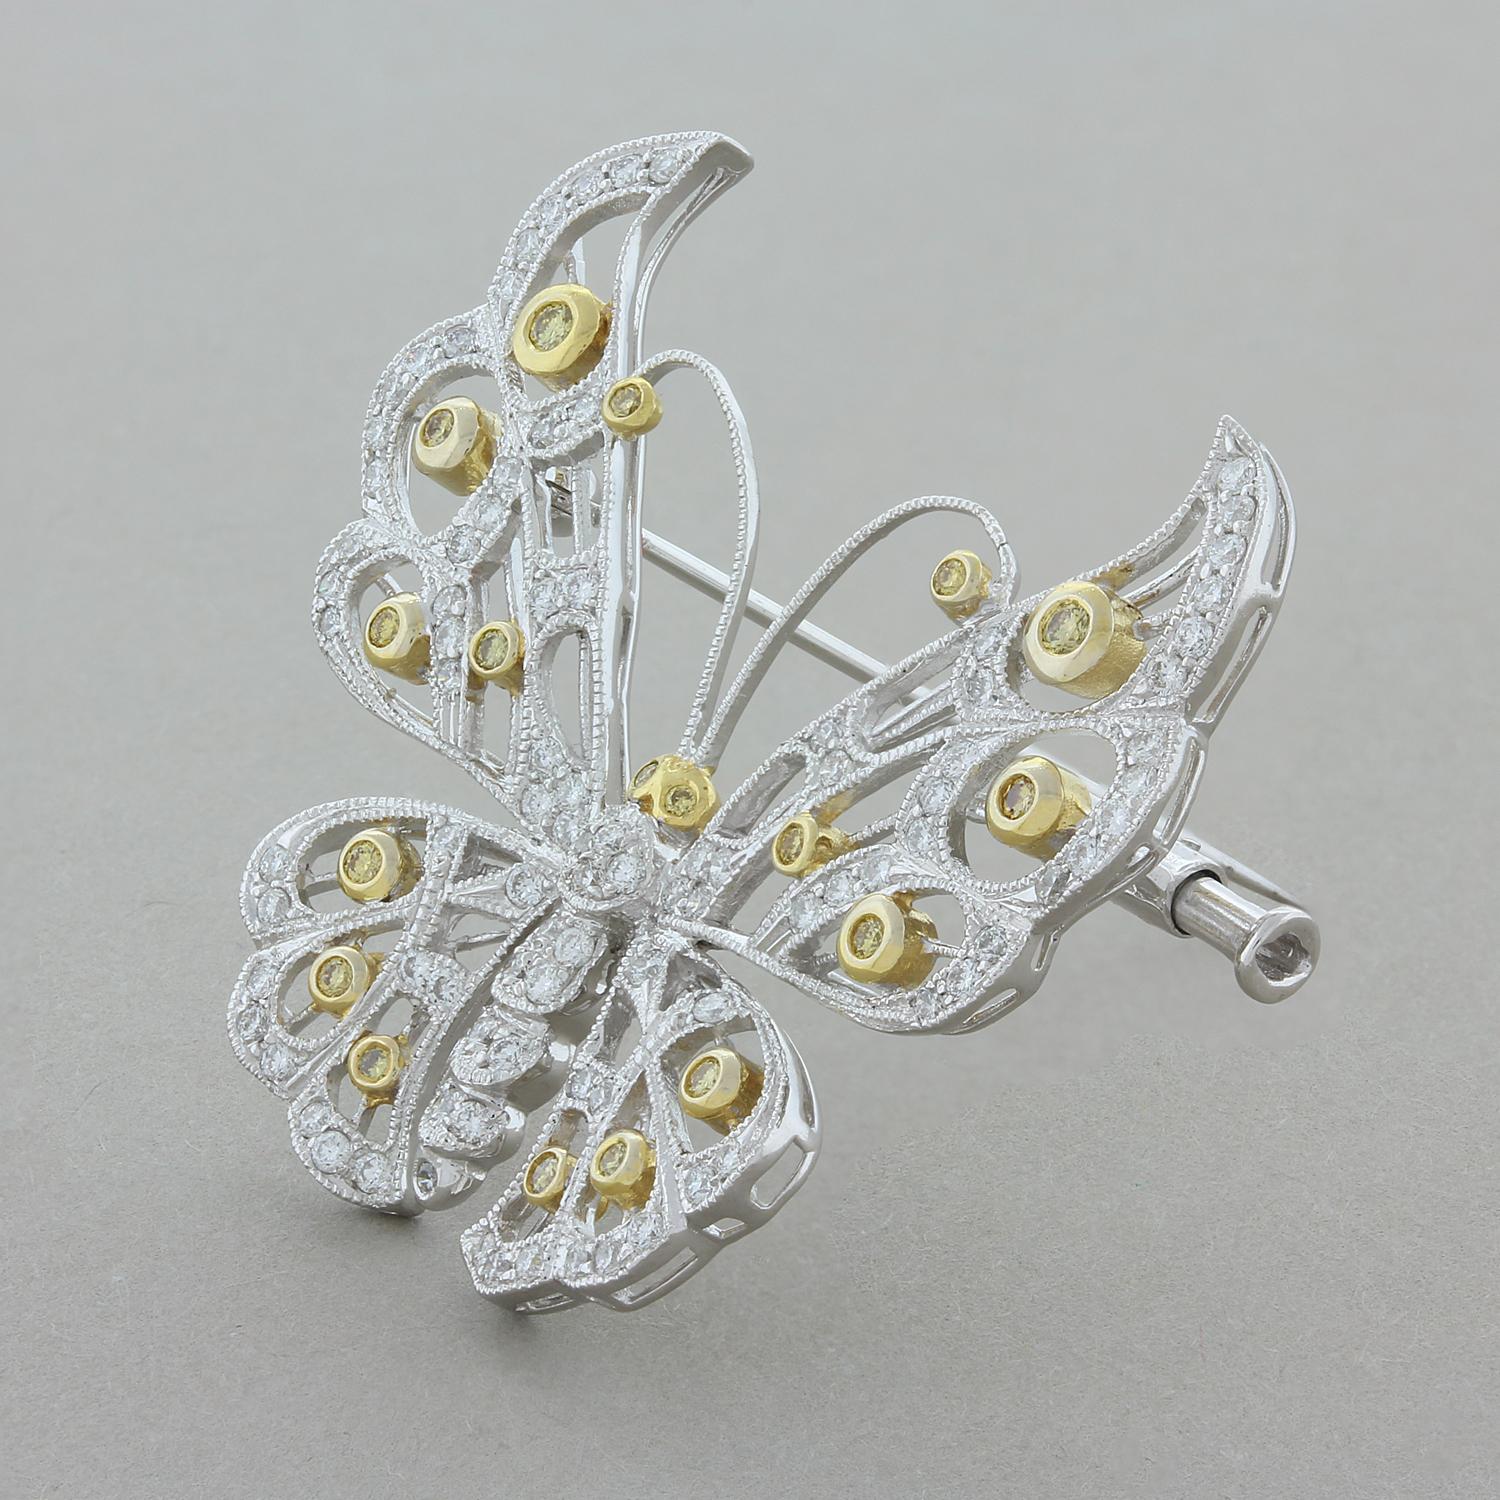 This flying proud butterfly brooch features 1.26 carats of round brilliant cut diamonds, fancy yellow and colorless. The fancy yellow diamonds are set in 18K yellow gold and the colorless diamonds are set in 18K white gold giving the pieces a great